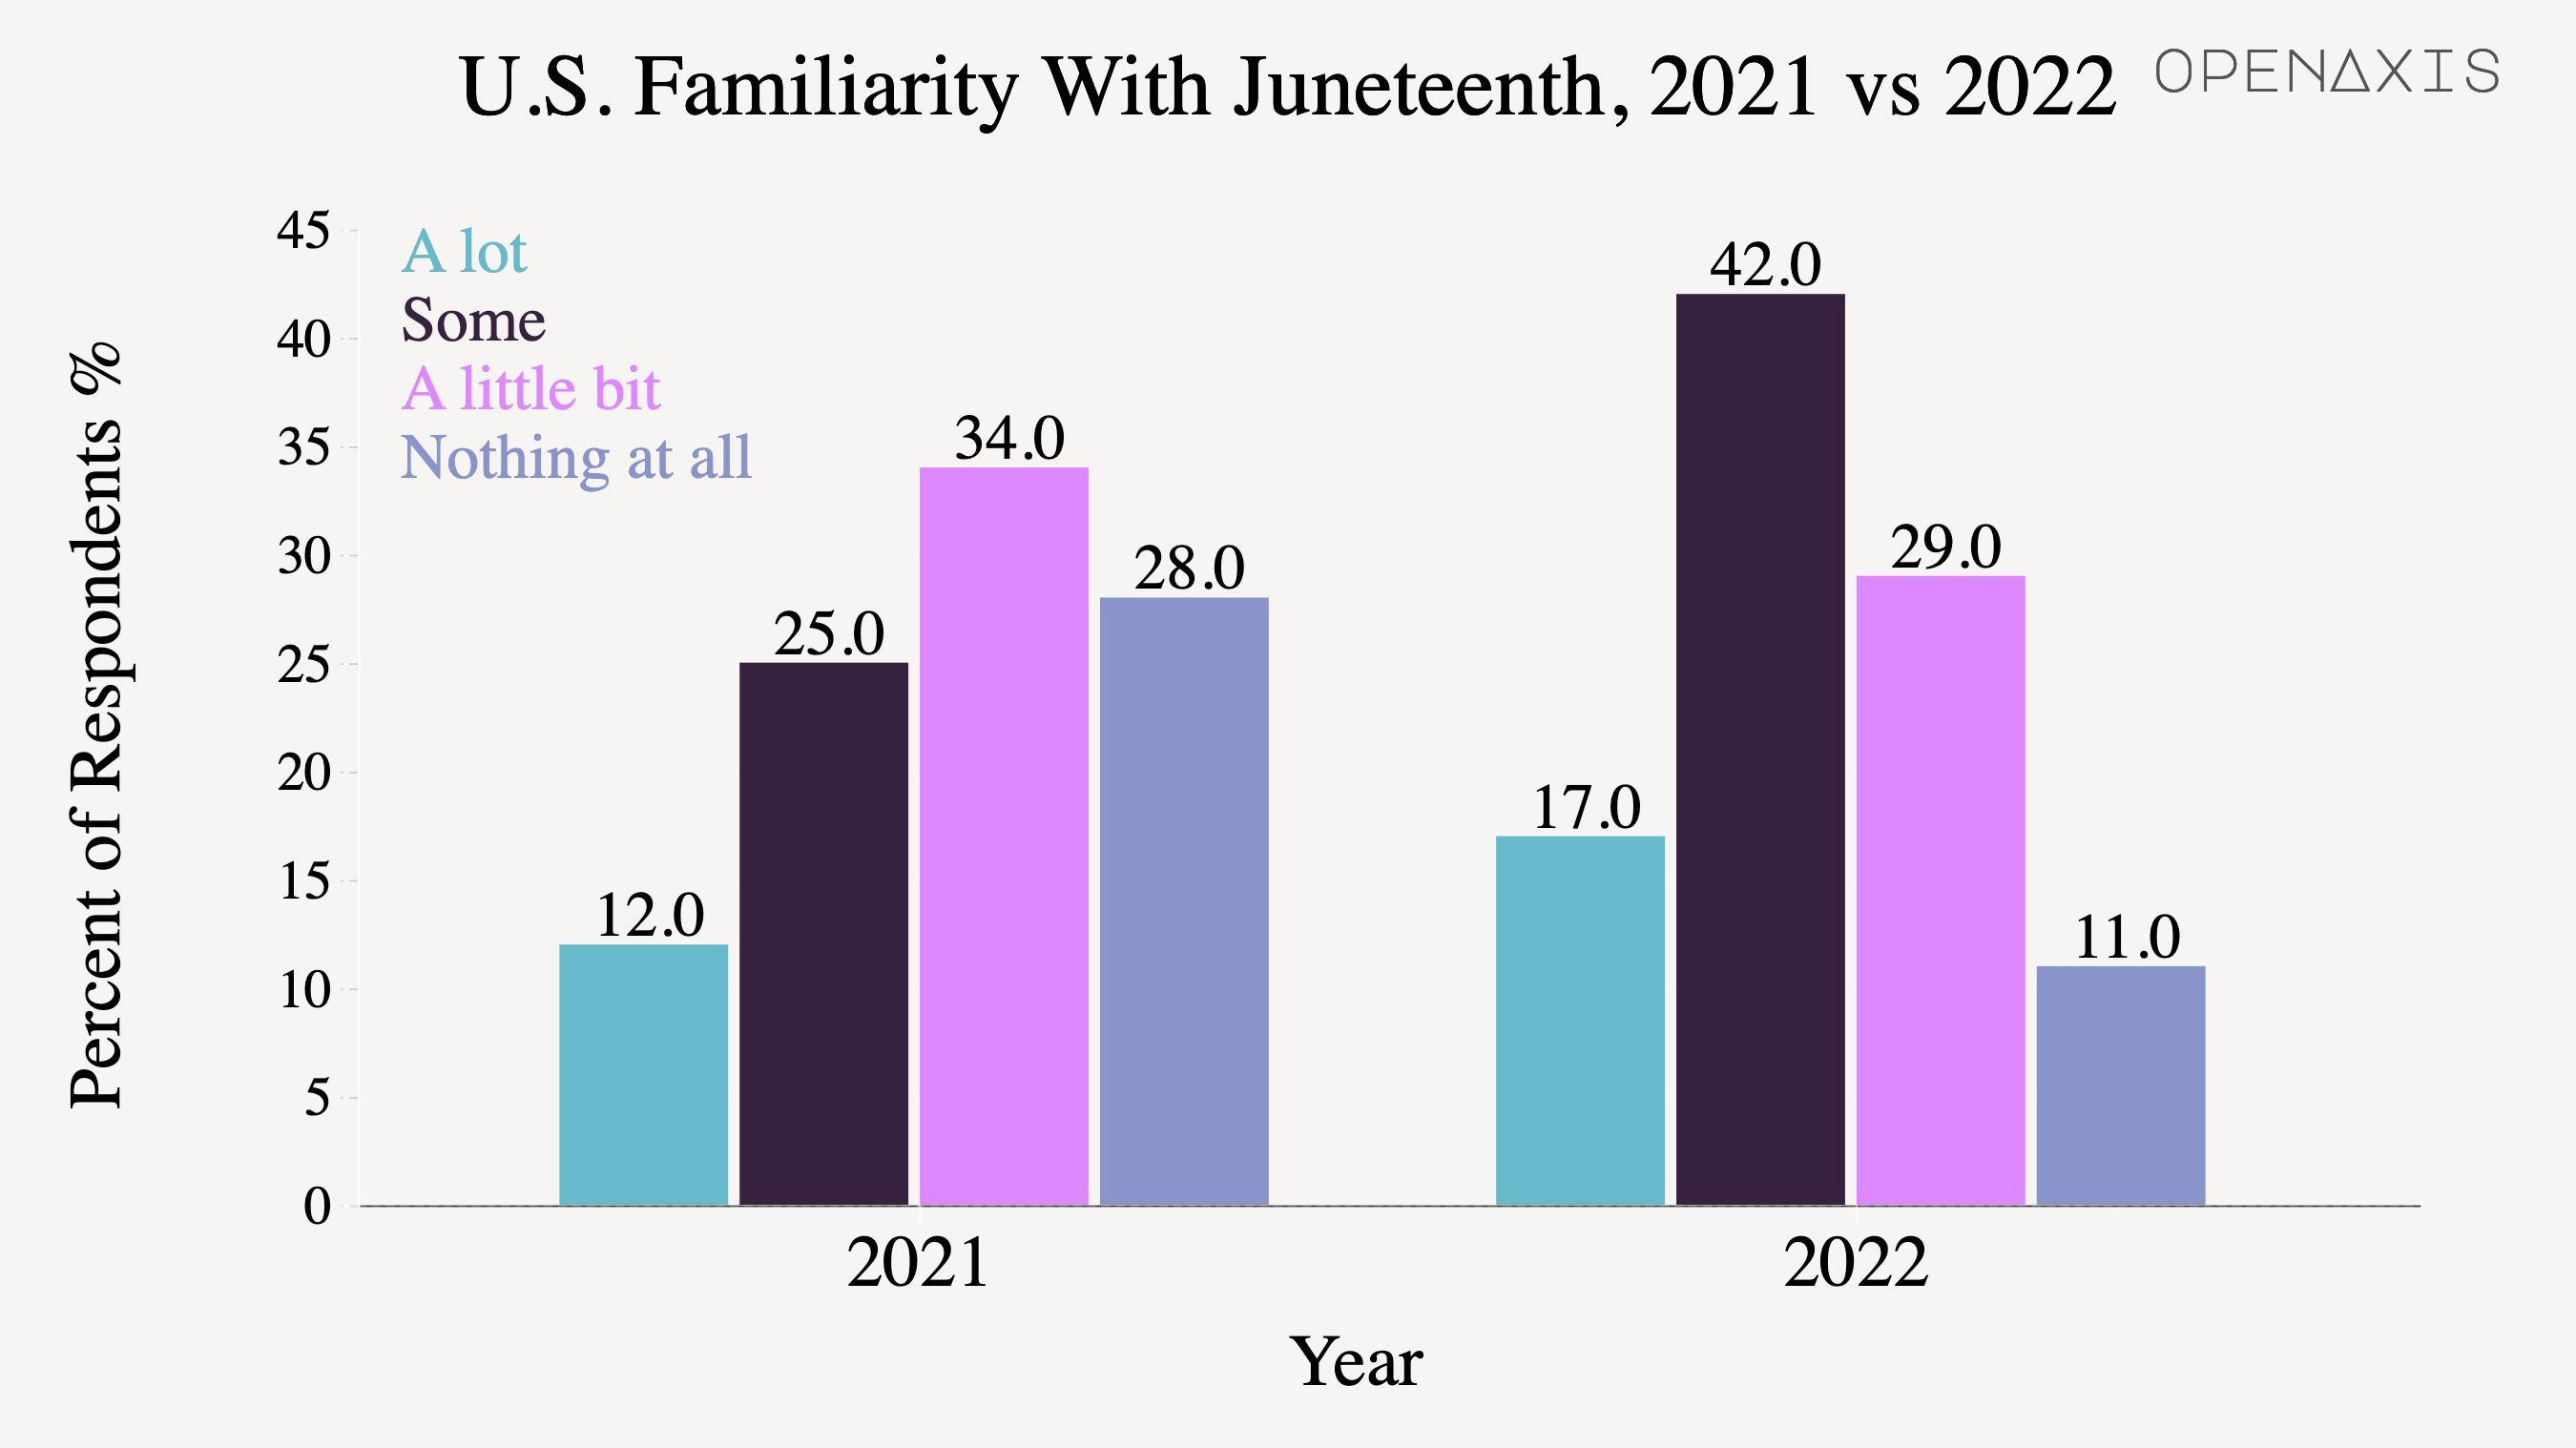 "U.S. Familiarity With Juneteenth, 2021 vs 2022"